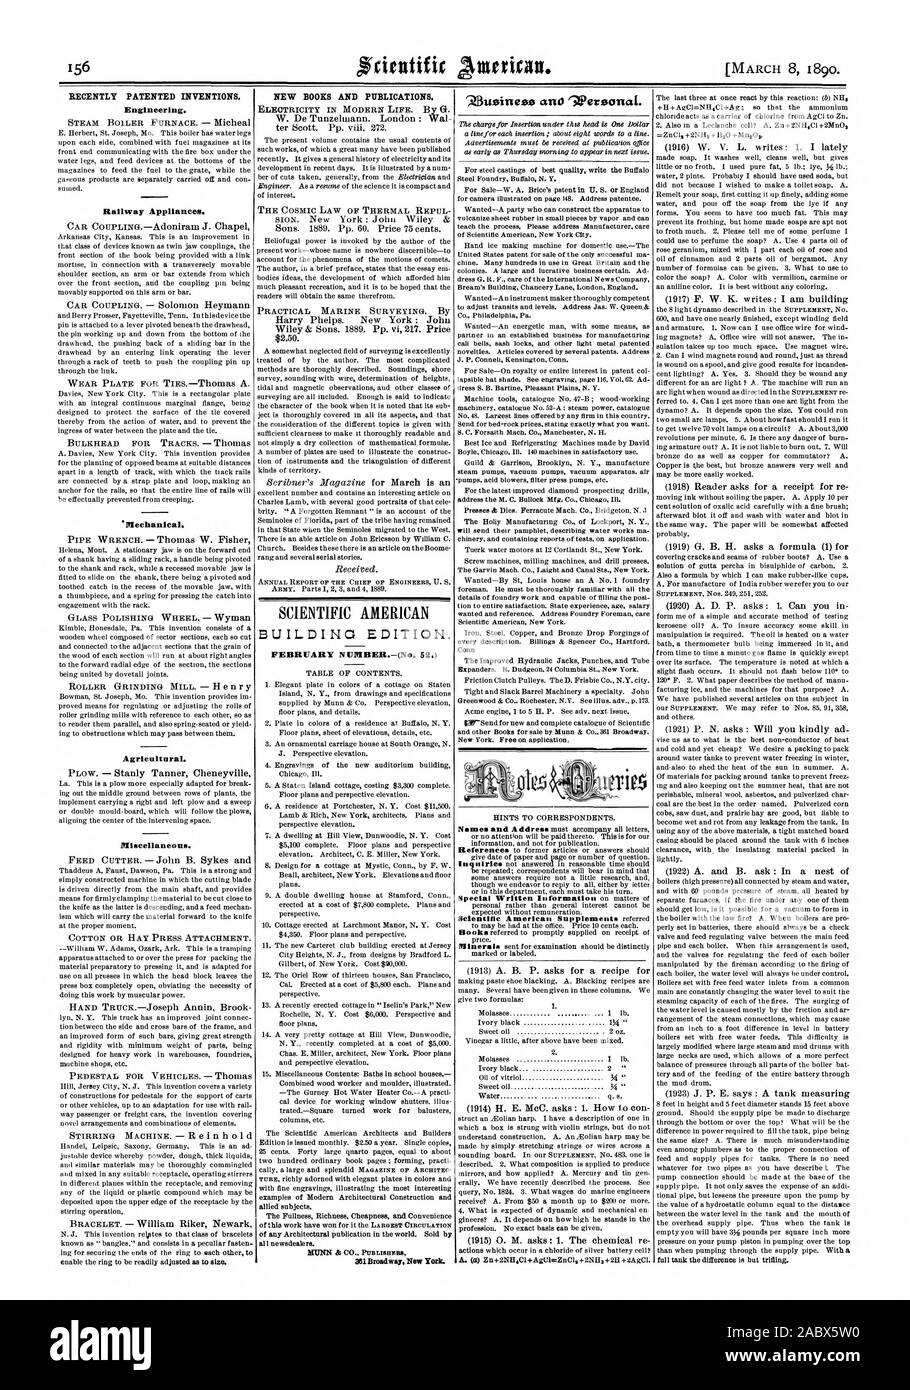 Engineering. Railway Appliances. Mechanical. Agricultural. Miscellaneous. NEW BOOKS AND PUBLICATIONS. BUILDING EDITION. FEBRUARY NUMBER.-(No. 52.) 861Broadway New York., scientific american, 1890-03-11 Stock Photo